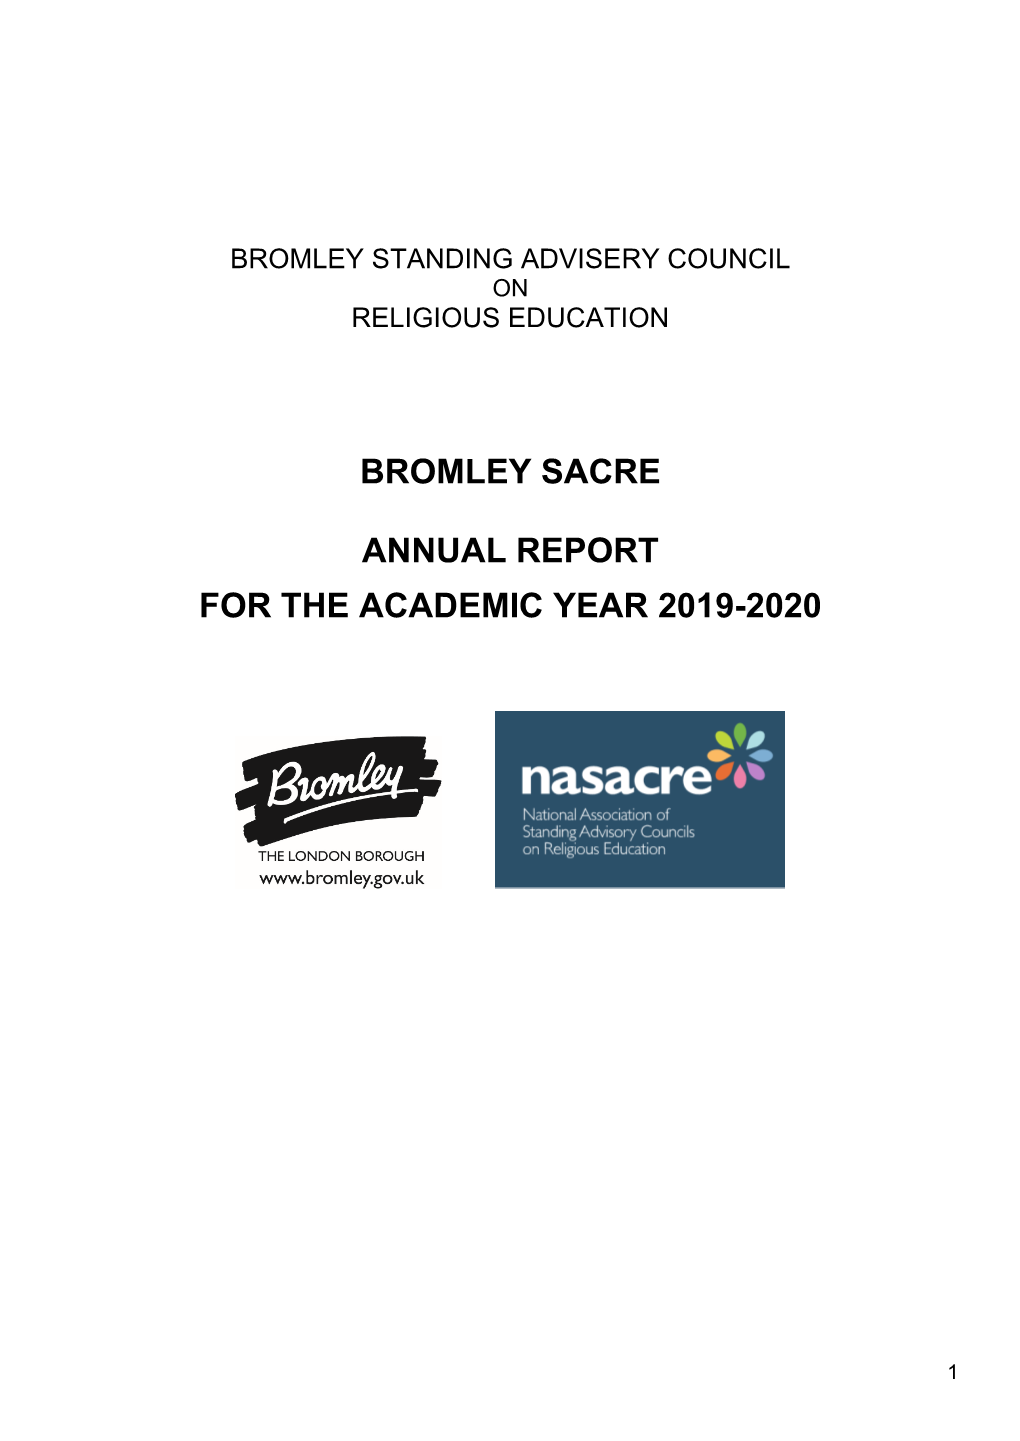 Bromley SACRE Annual Report 2019